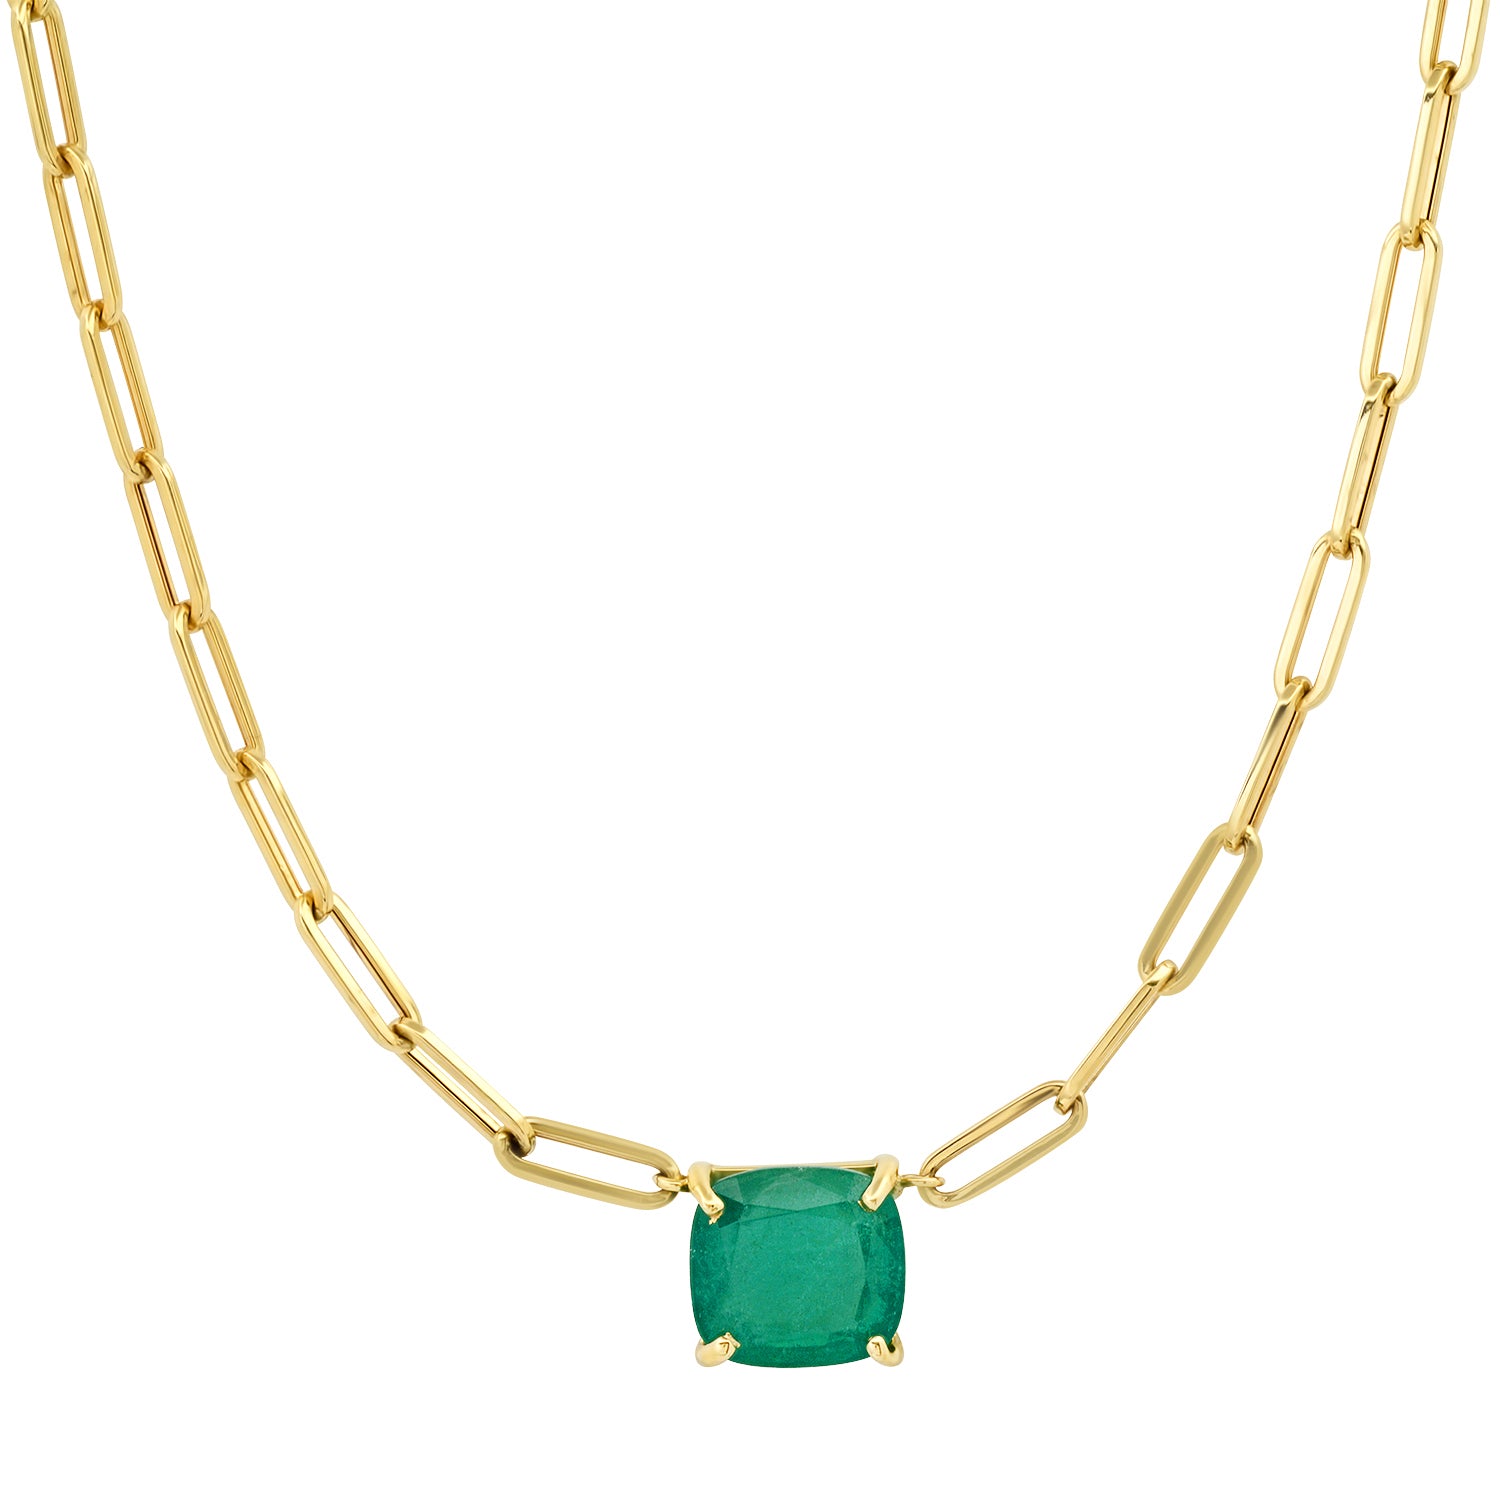 Cushion Cut Emerald on Paperclip Link Chain Necklace